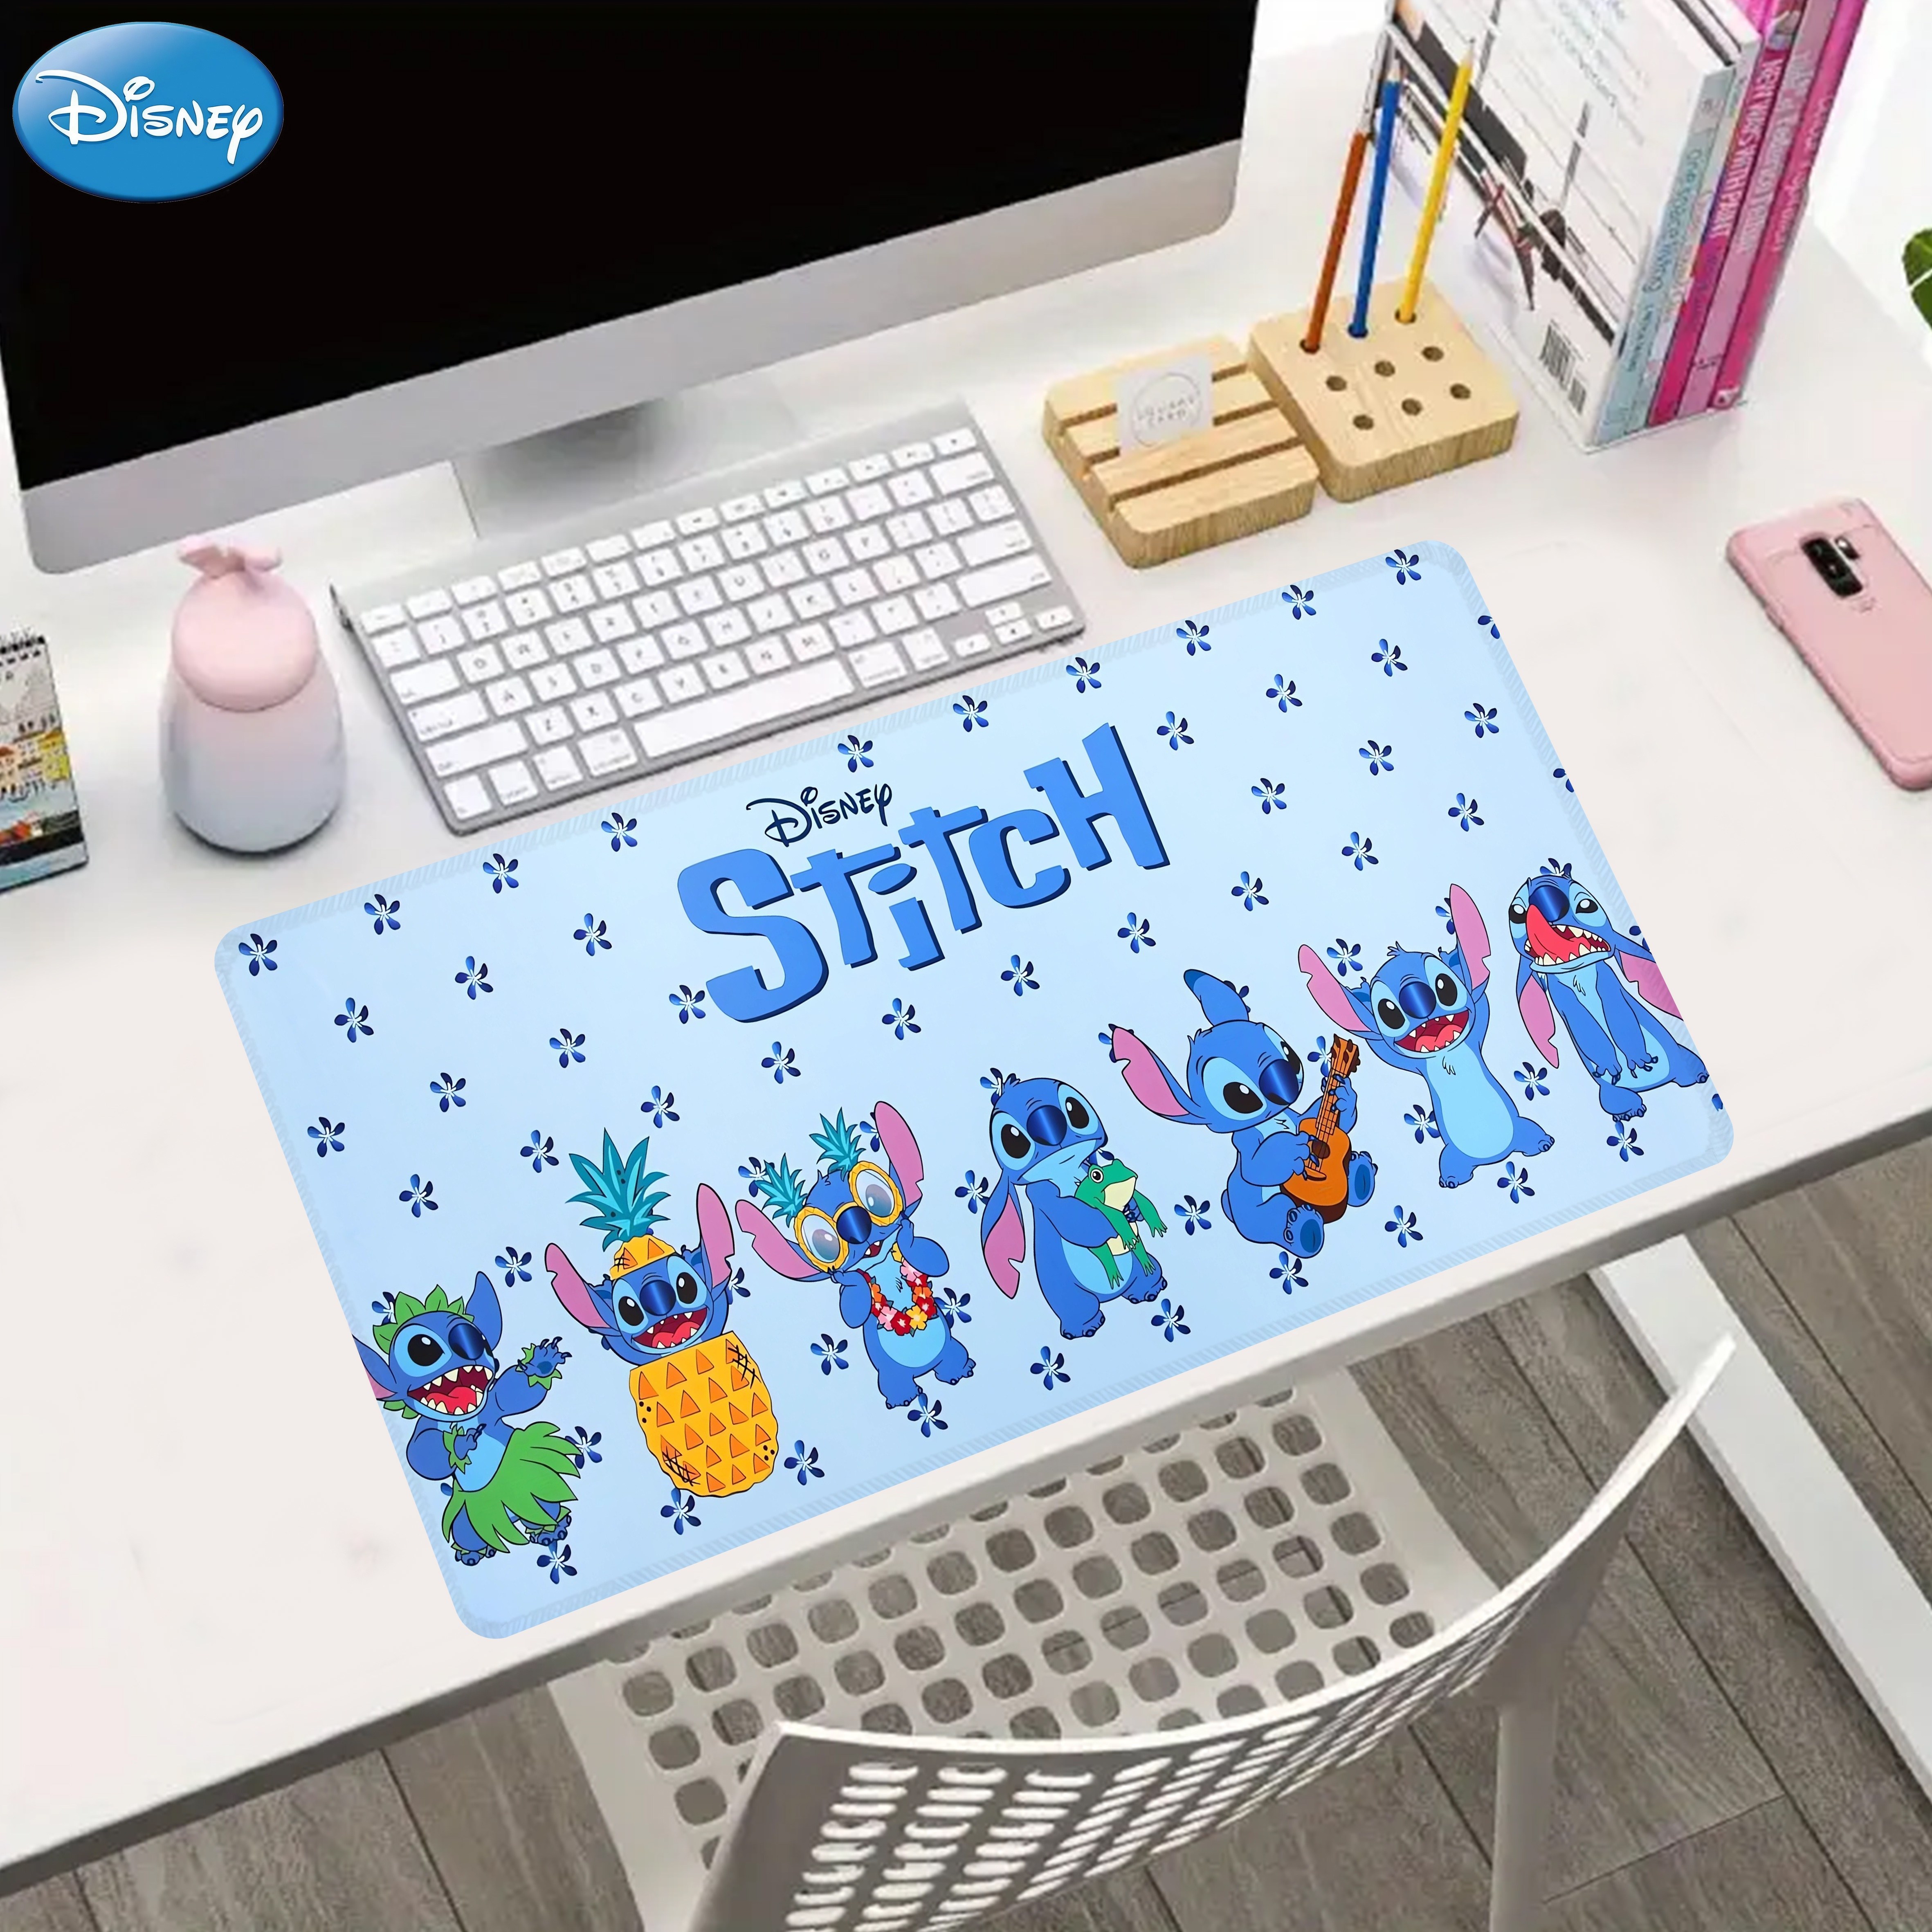 

1pc, Authorized, Disney's Funny Mouse Pad For Desk, Cute Office Decor, Disney's Non-slip Rubber Base, Disney's Stitch Computer Mouse Pad, Waterproof Multi Functional Mouse Pad For Office